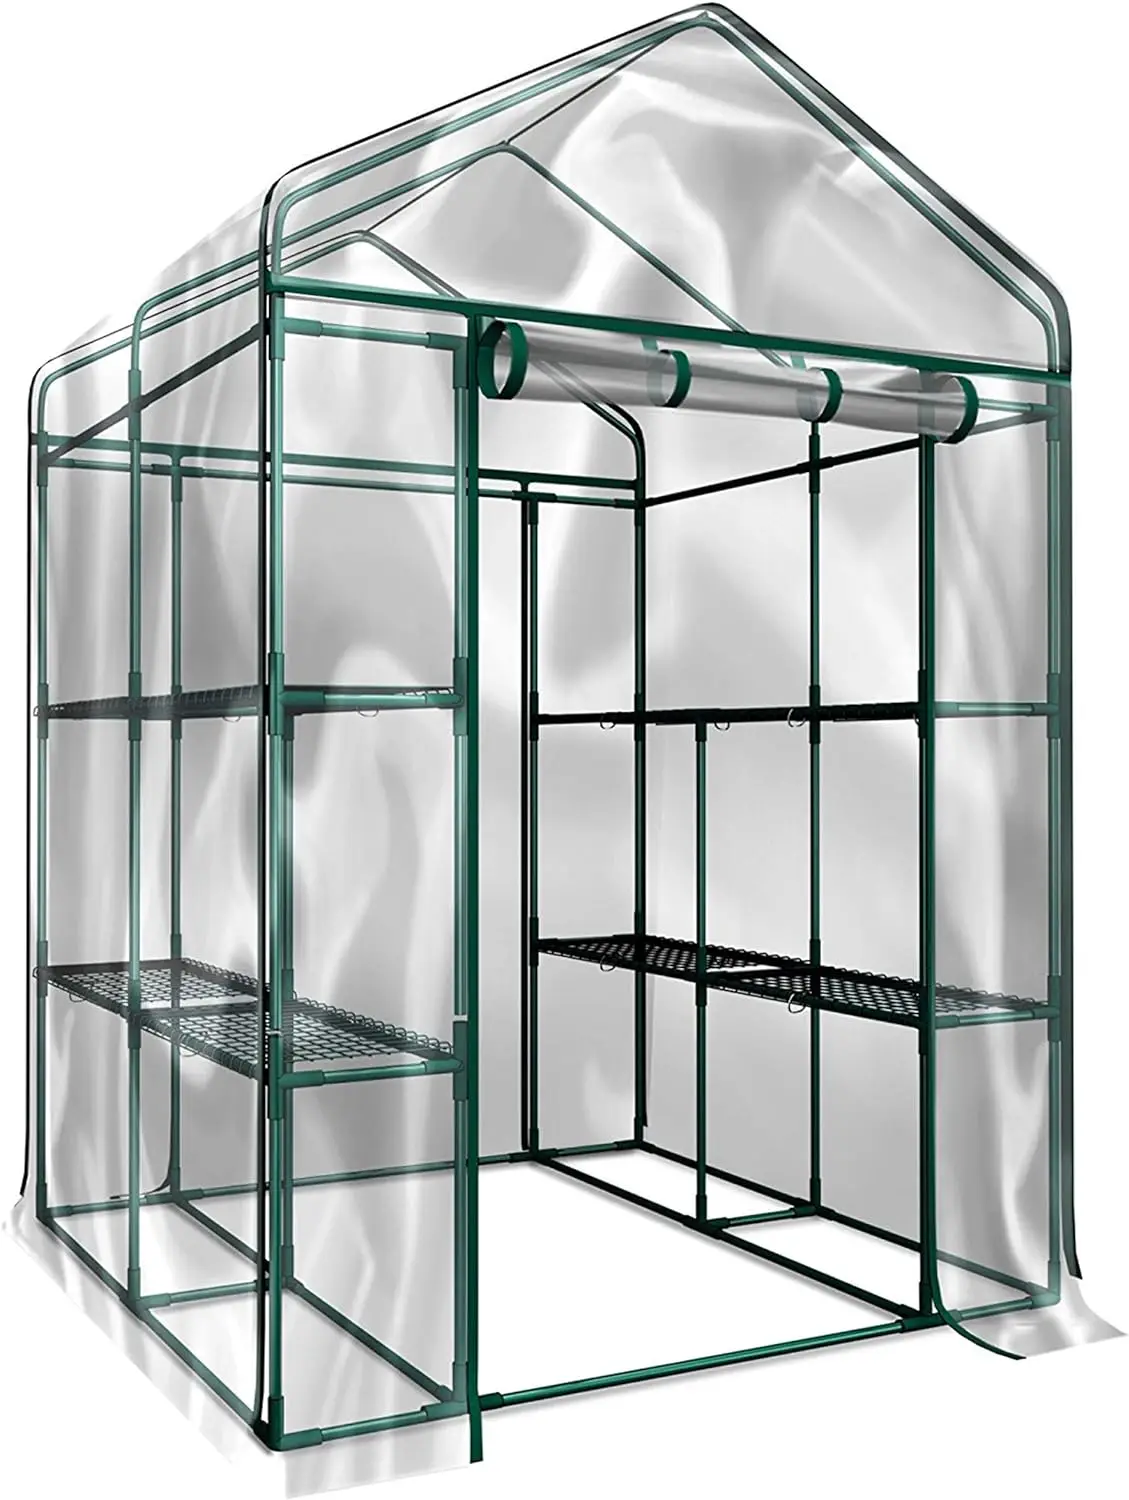 

New Greenhouse 8 Sturdy Shelves and PVC Cover for Indoor or Outdoor Use - 56 X 56 X 76-Inch Green House Free Shipping